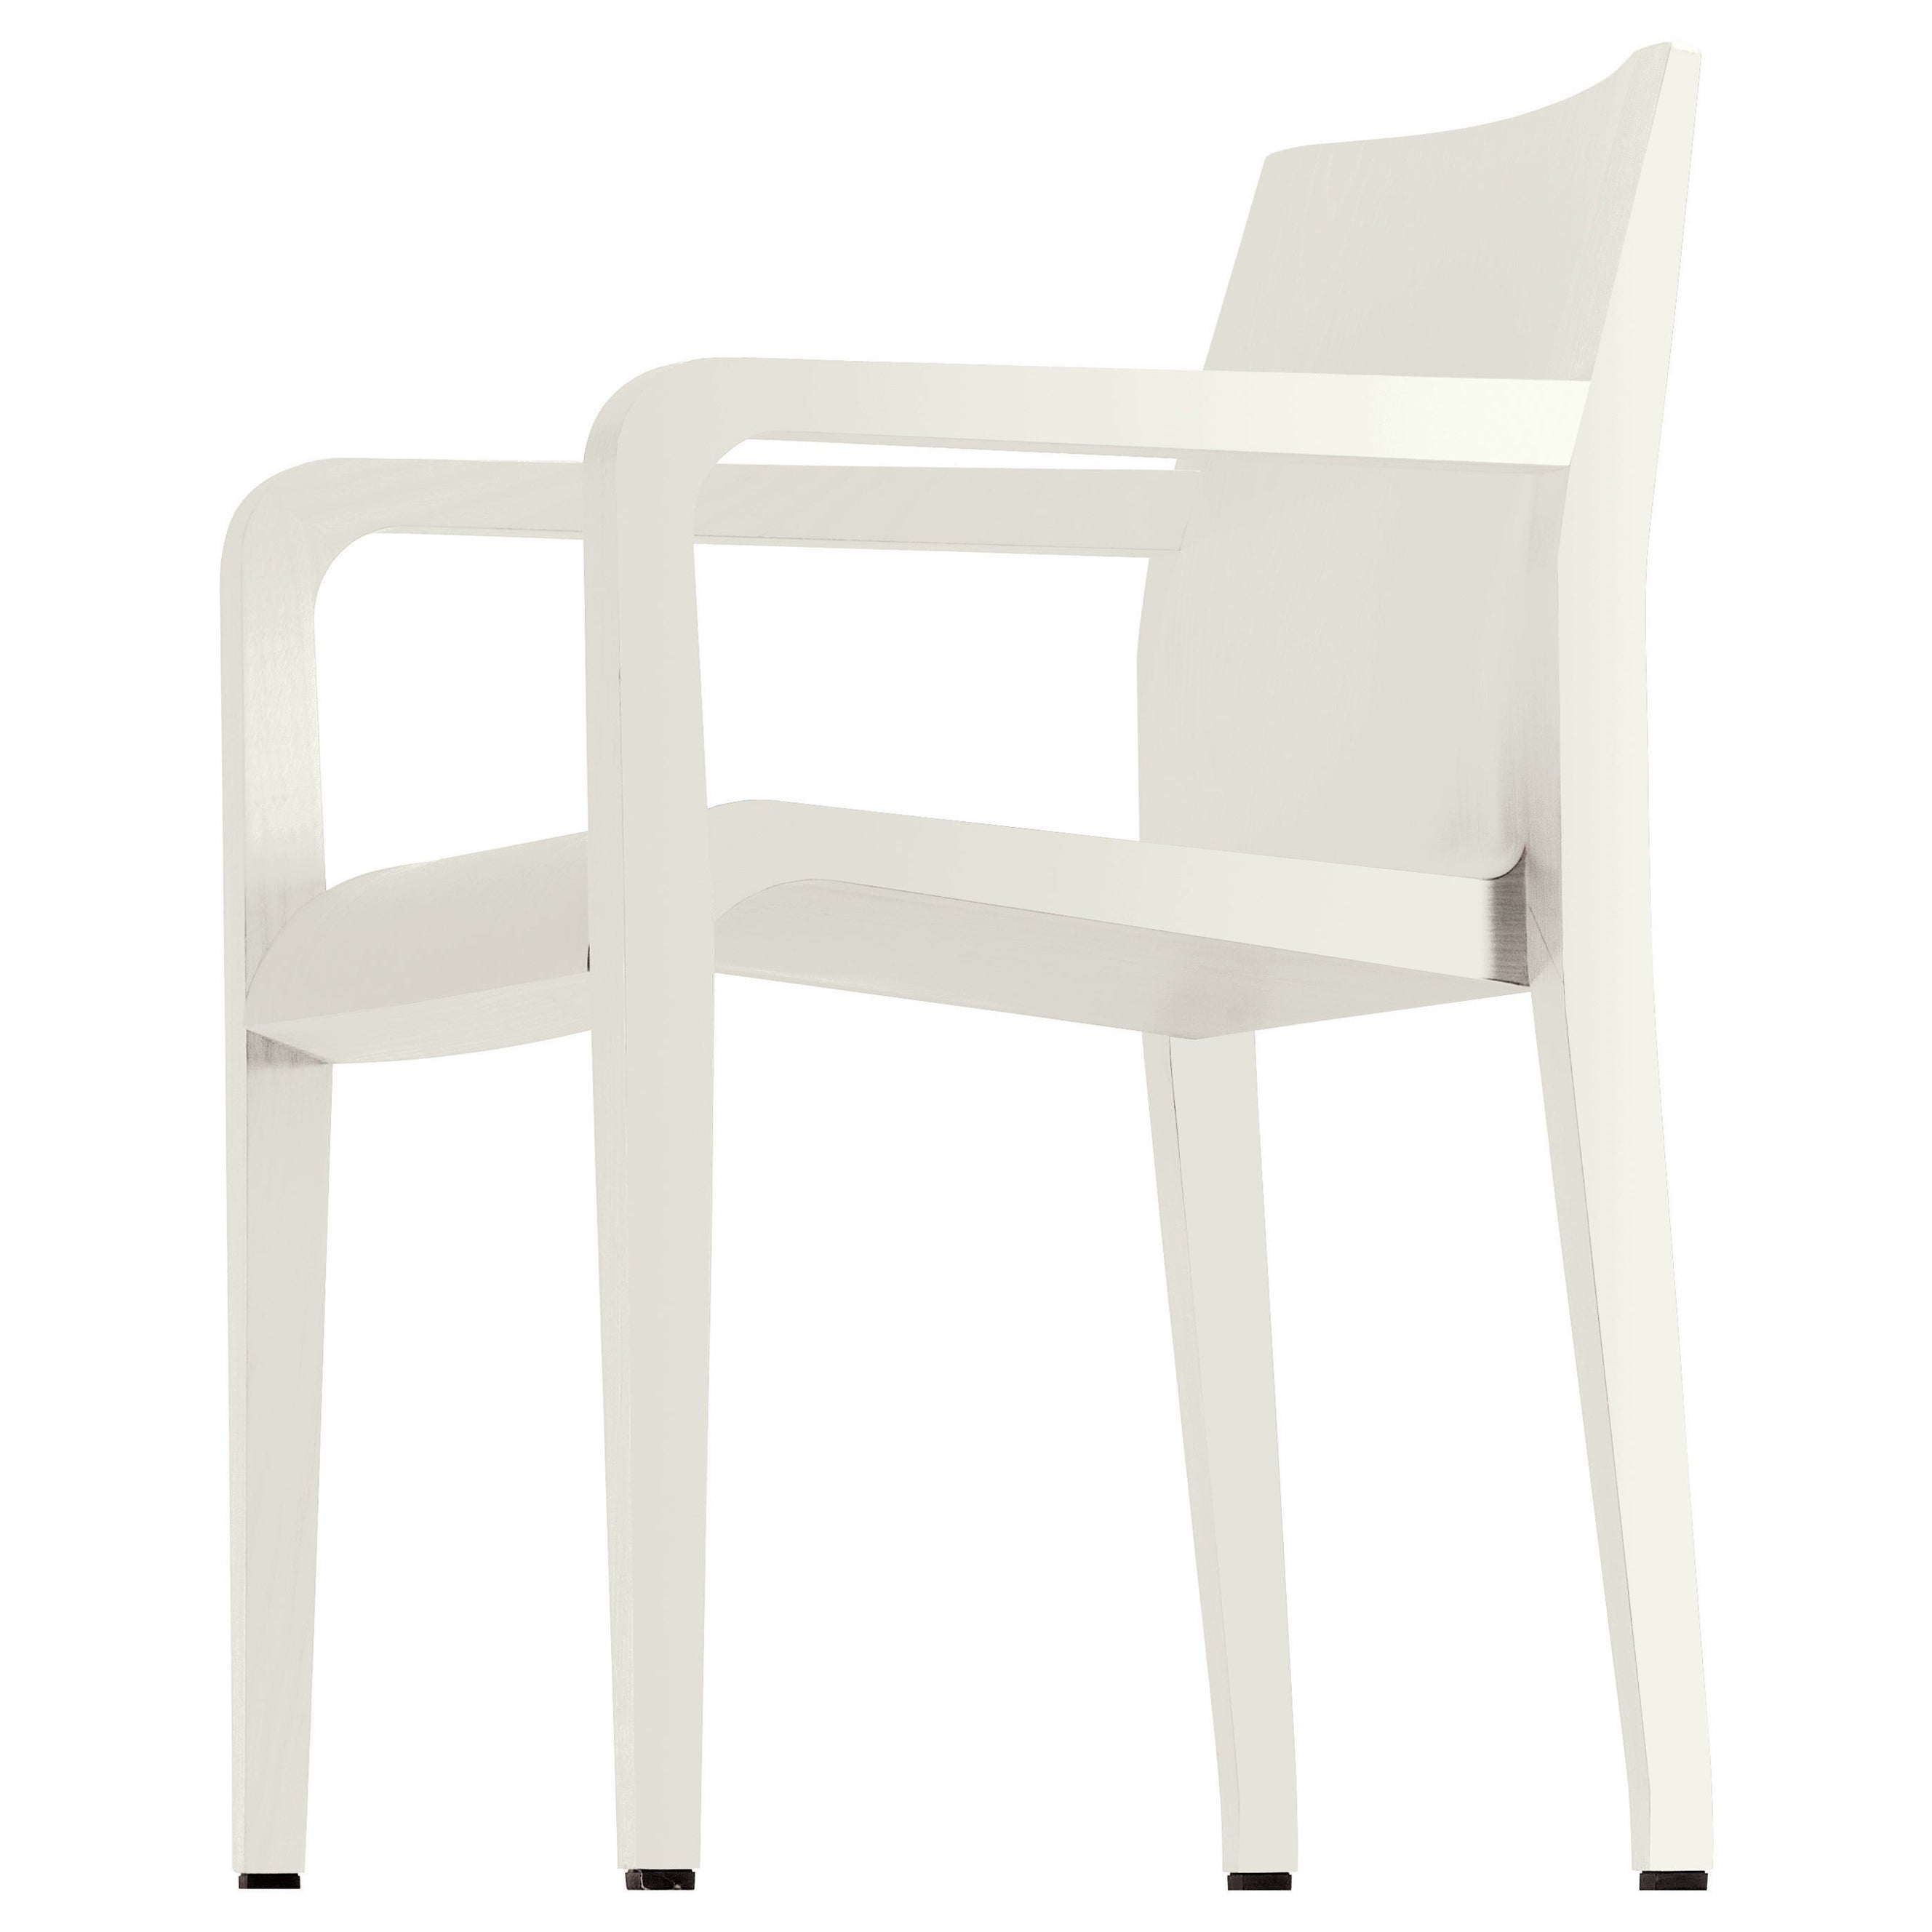 Alias 304 Laleggera Armrest Chair in White Color Stained Wood by Riccardo Blumer